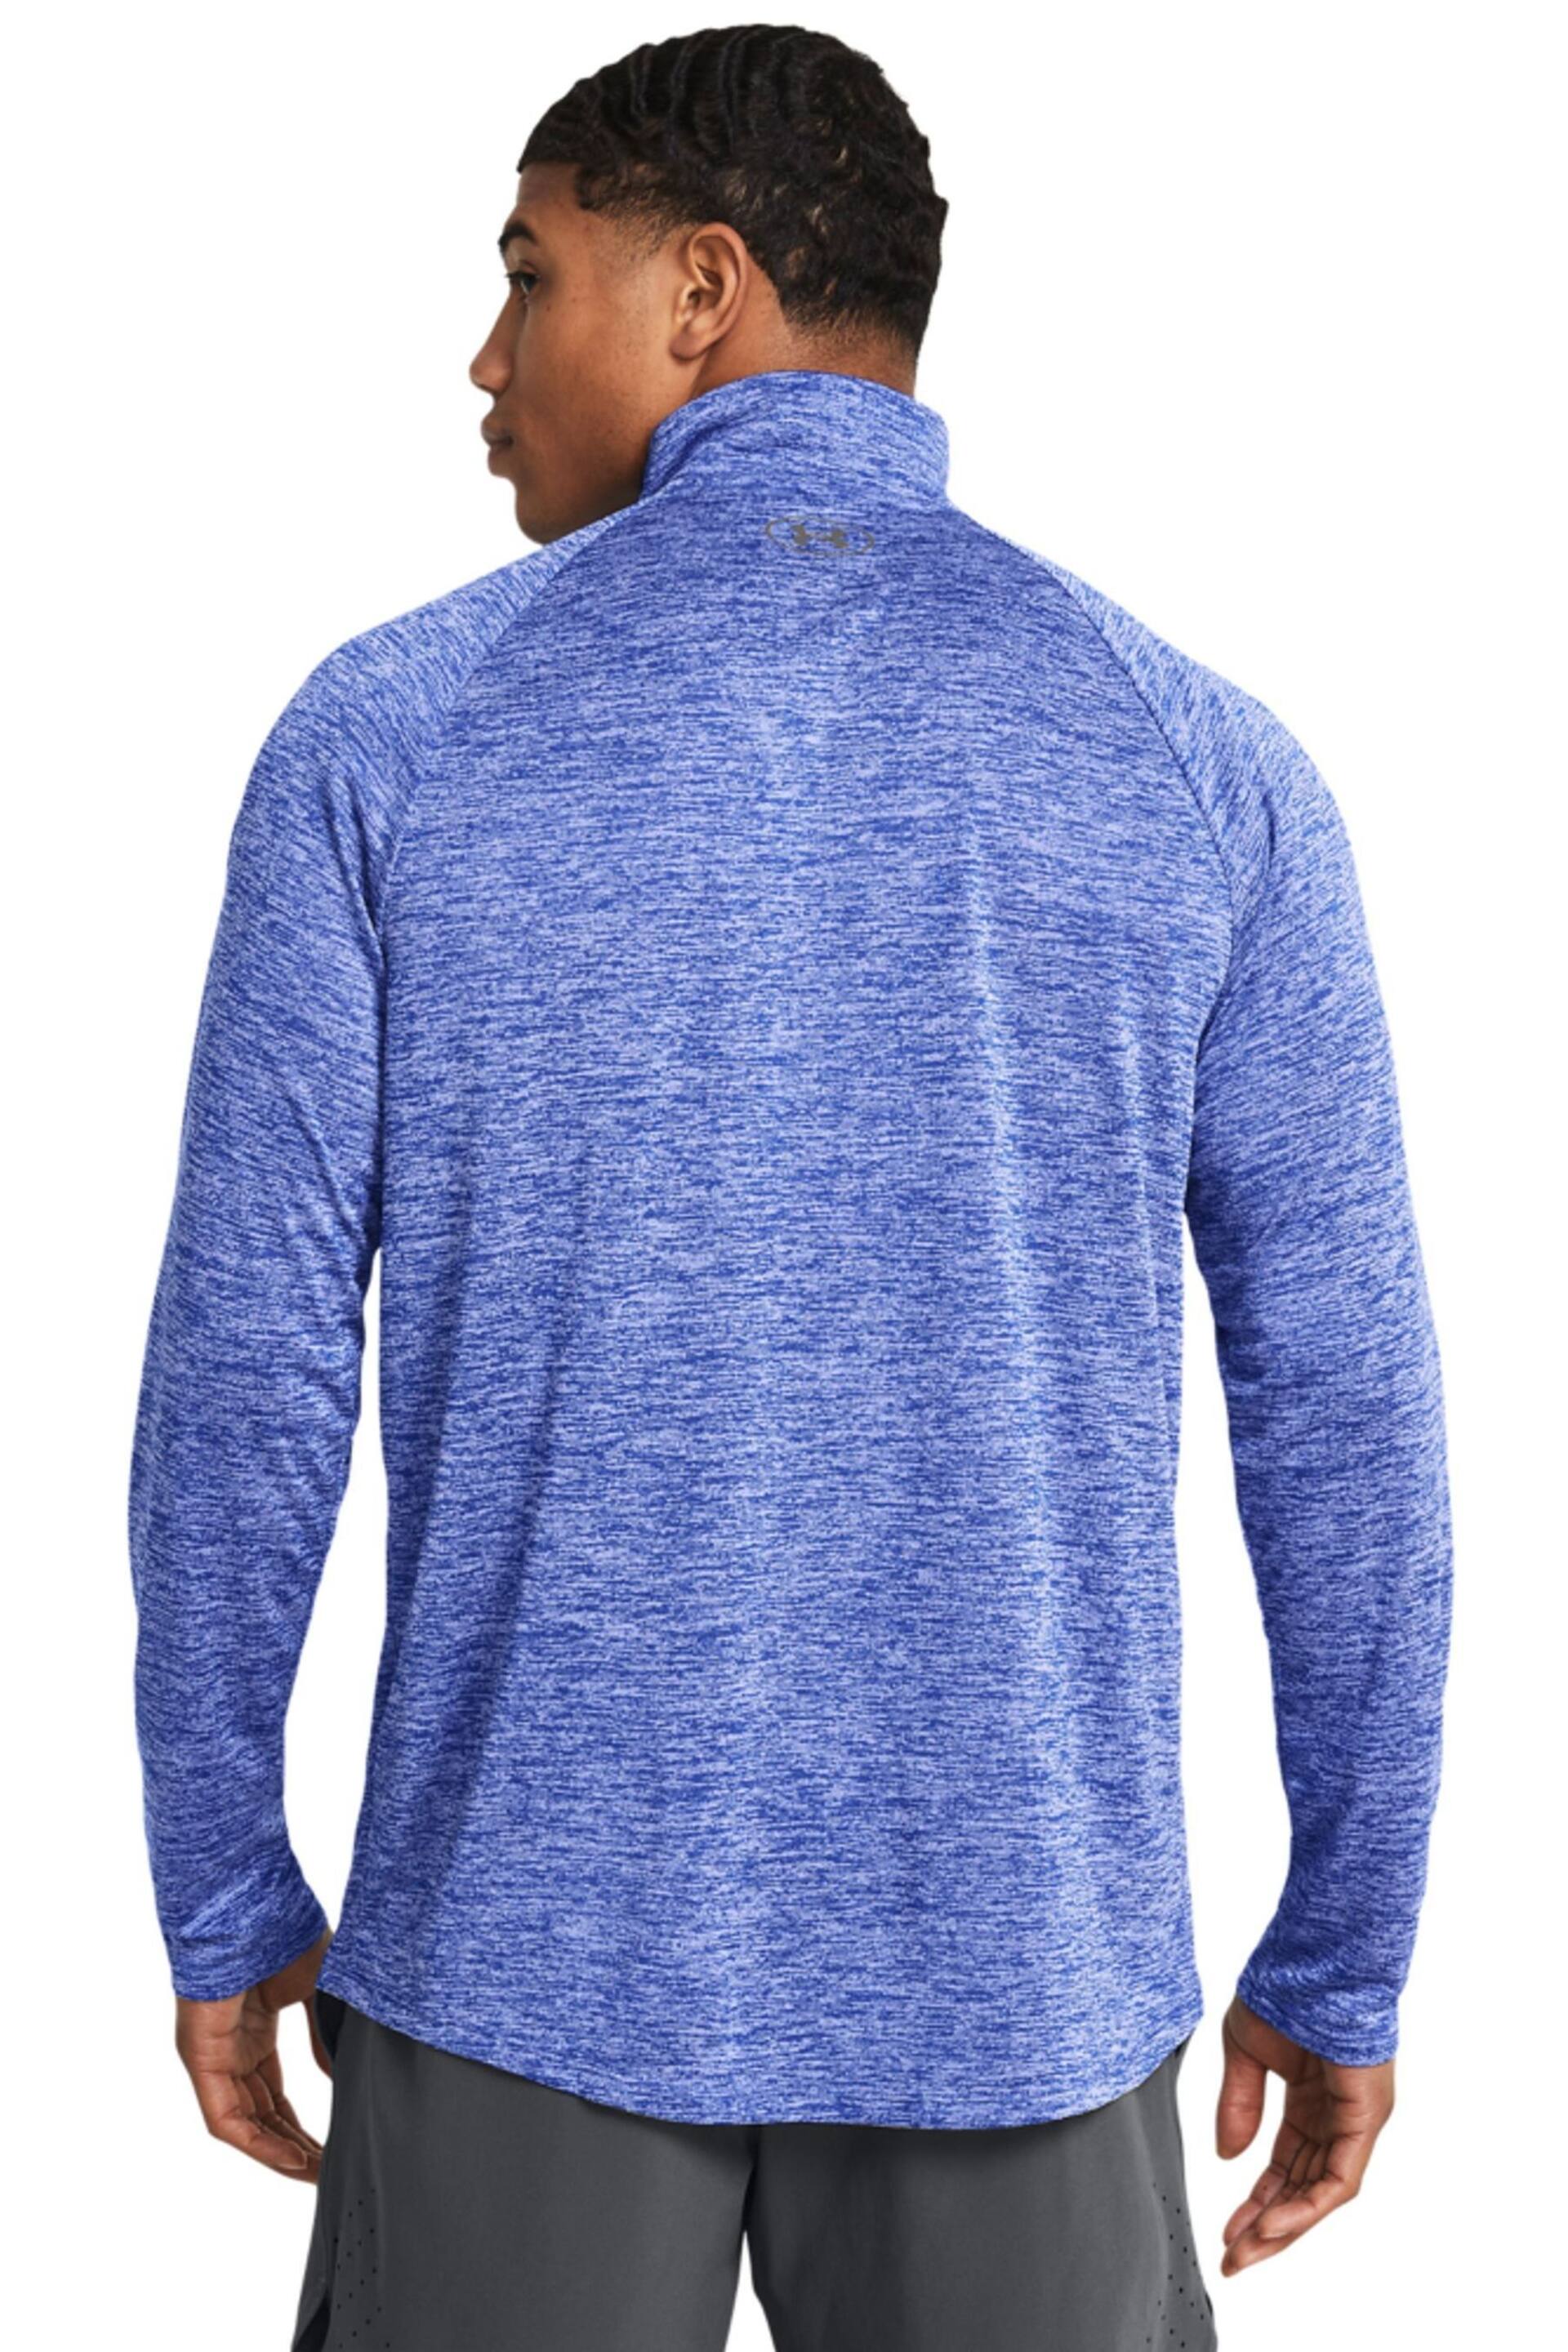 Under Armour Bright Blue Under Armour Bright Blue Tech 2.0 1/2 Zip Top - Image 2 of 6